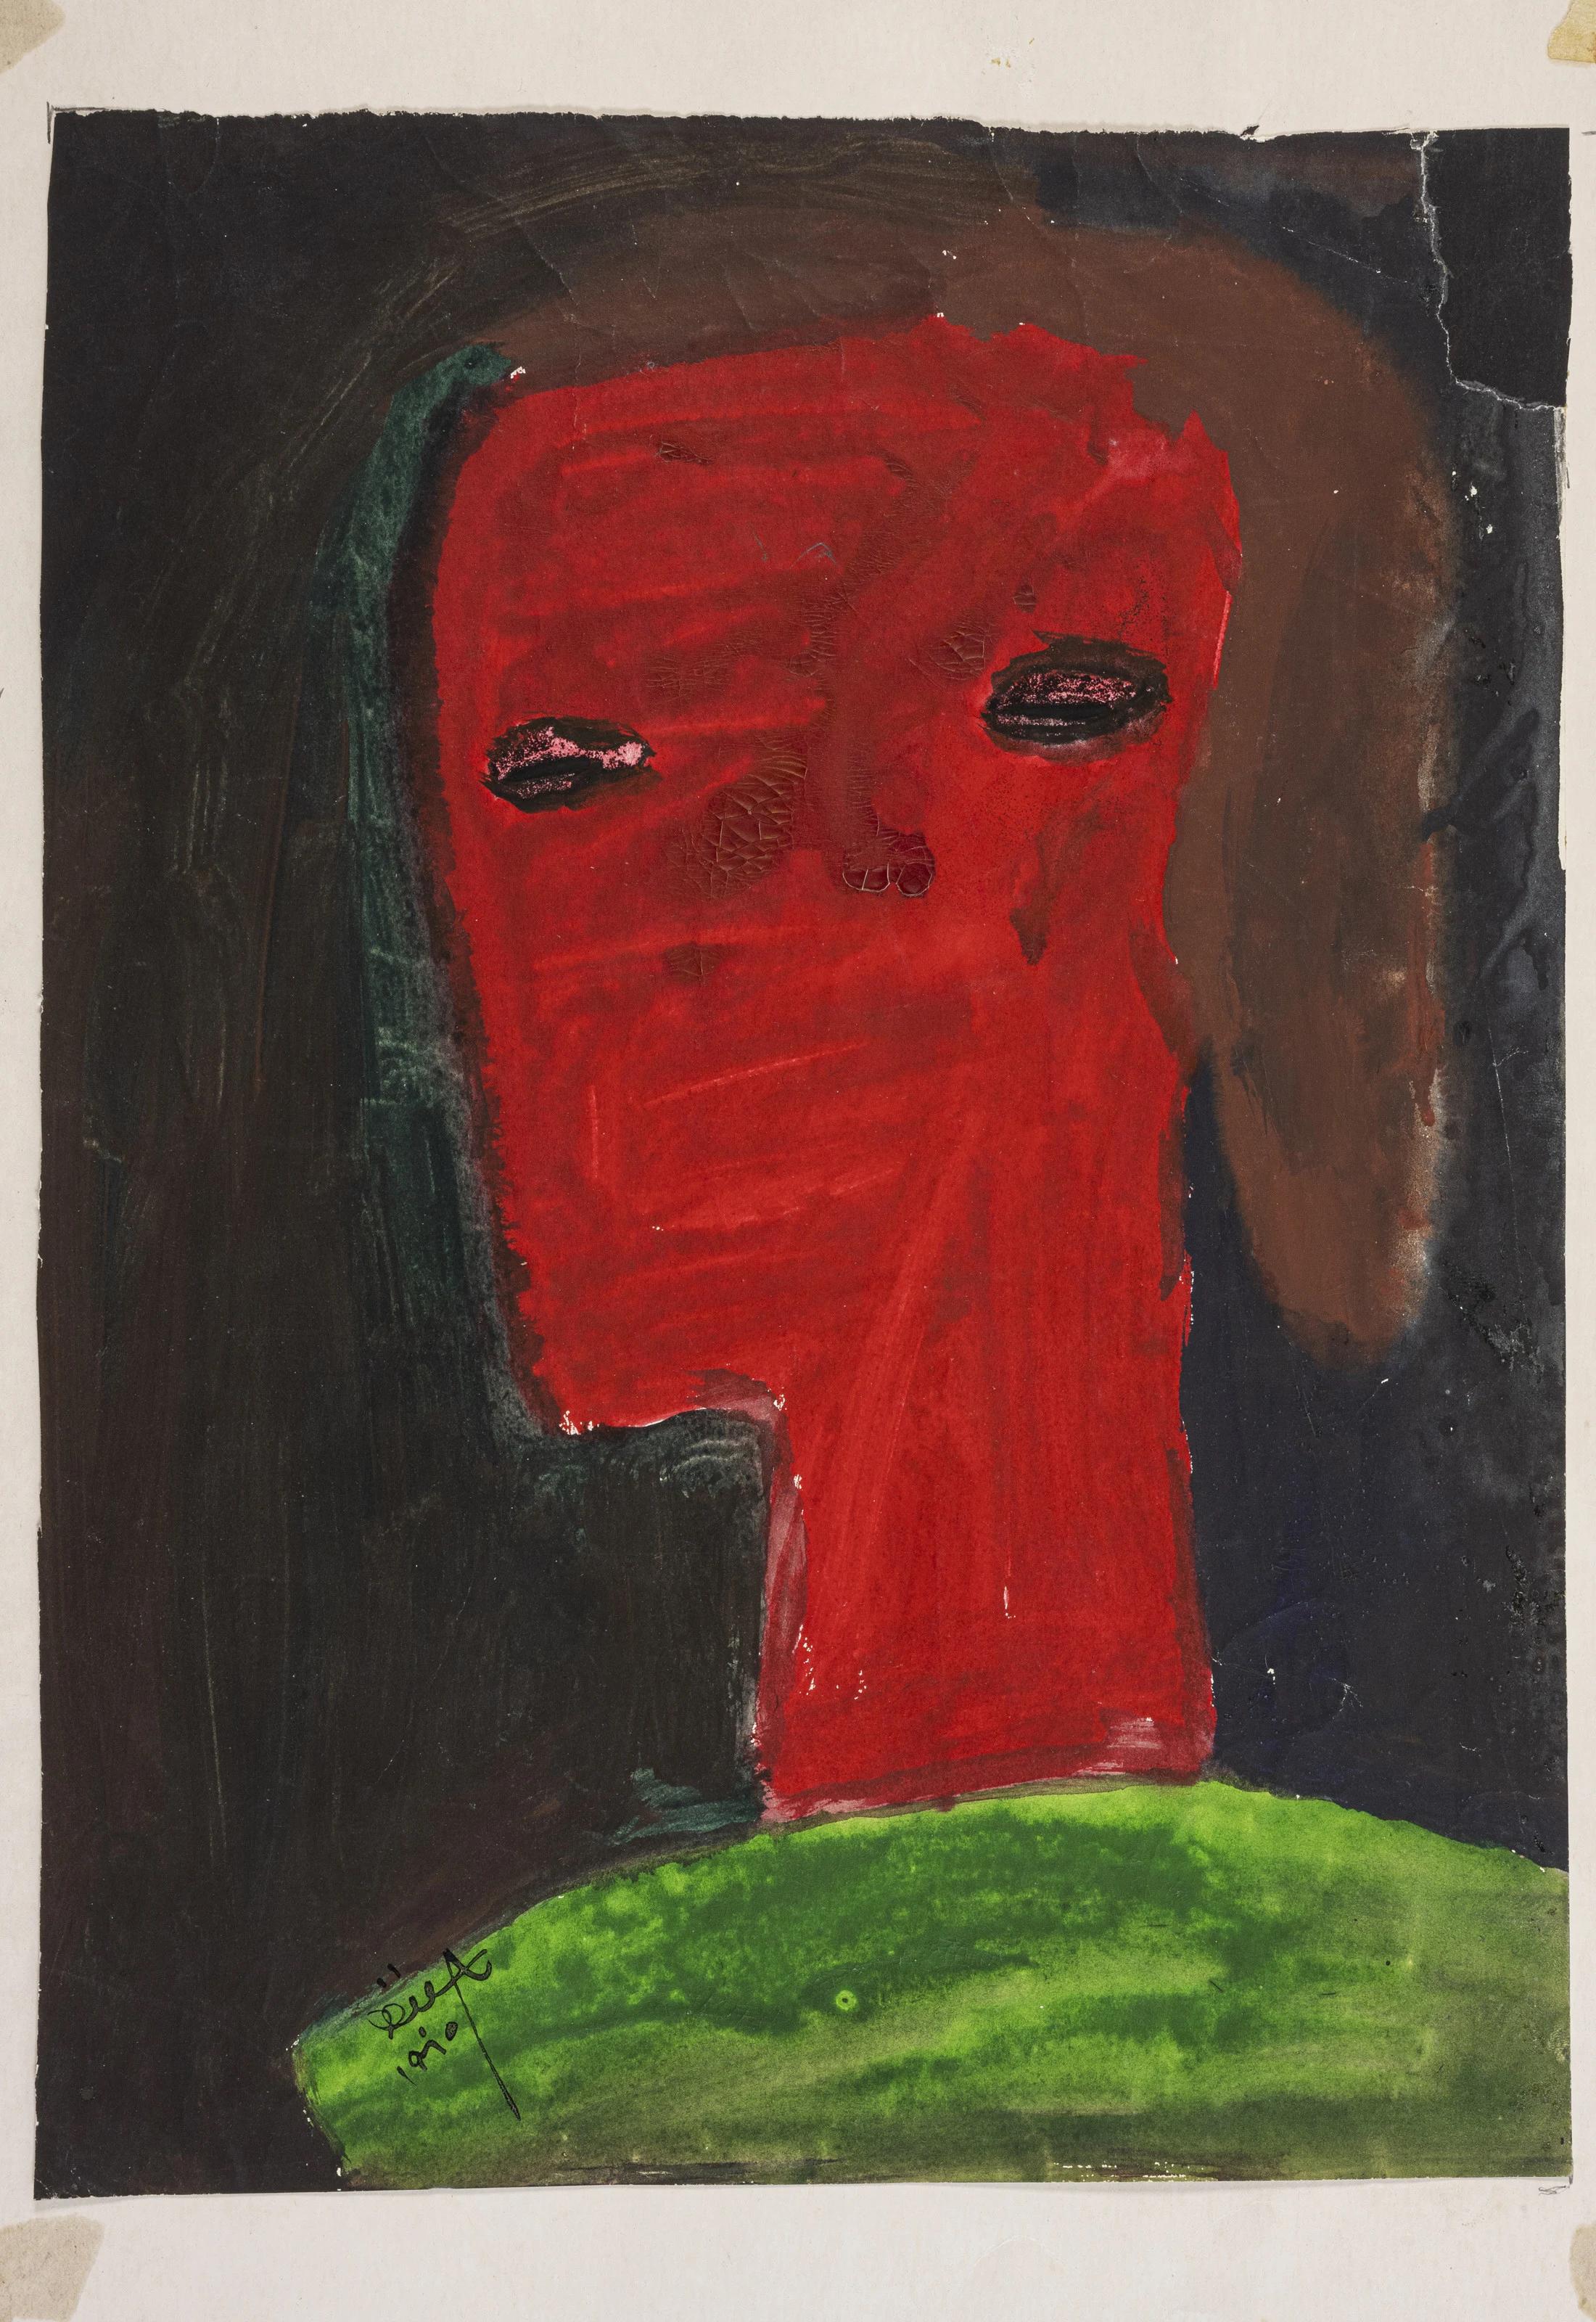 "Abstract Visage" Painting 16" x 10" inch (1970) by KAMAL KHALIFA

Kamal Khalifa is regarded as one of Egypt’s most prolific modern artists. He left the art world with several categories of his intensely unique artwork consisting of sculpture,